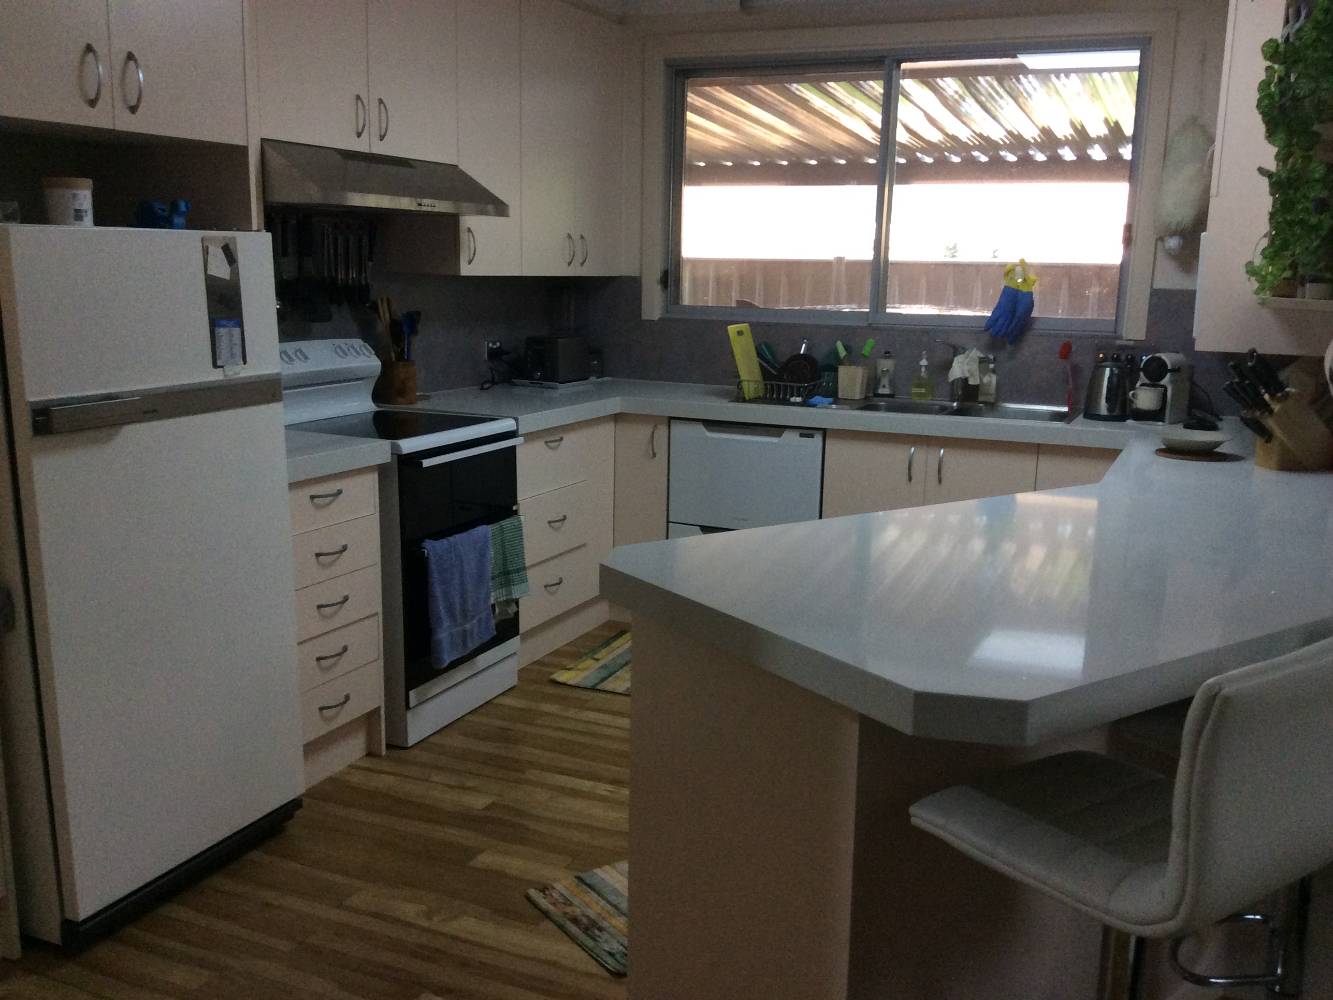 Spacious and well equipped kitchen